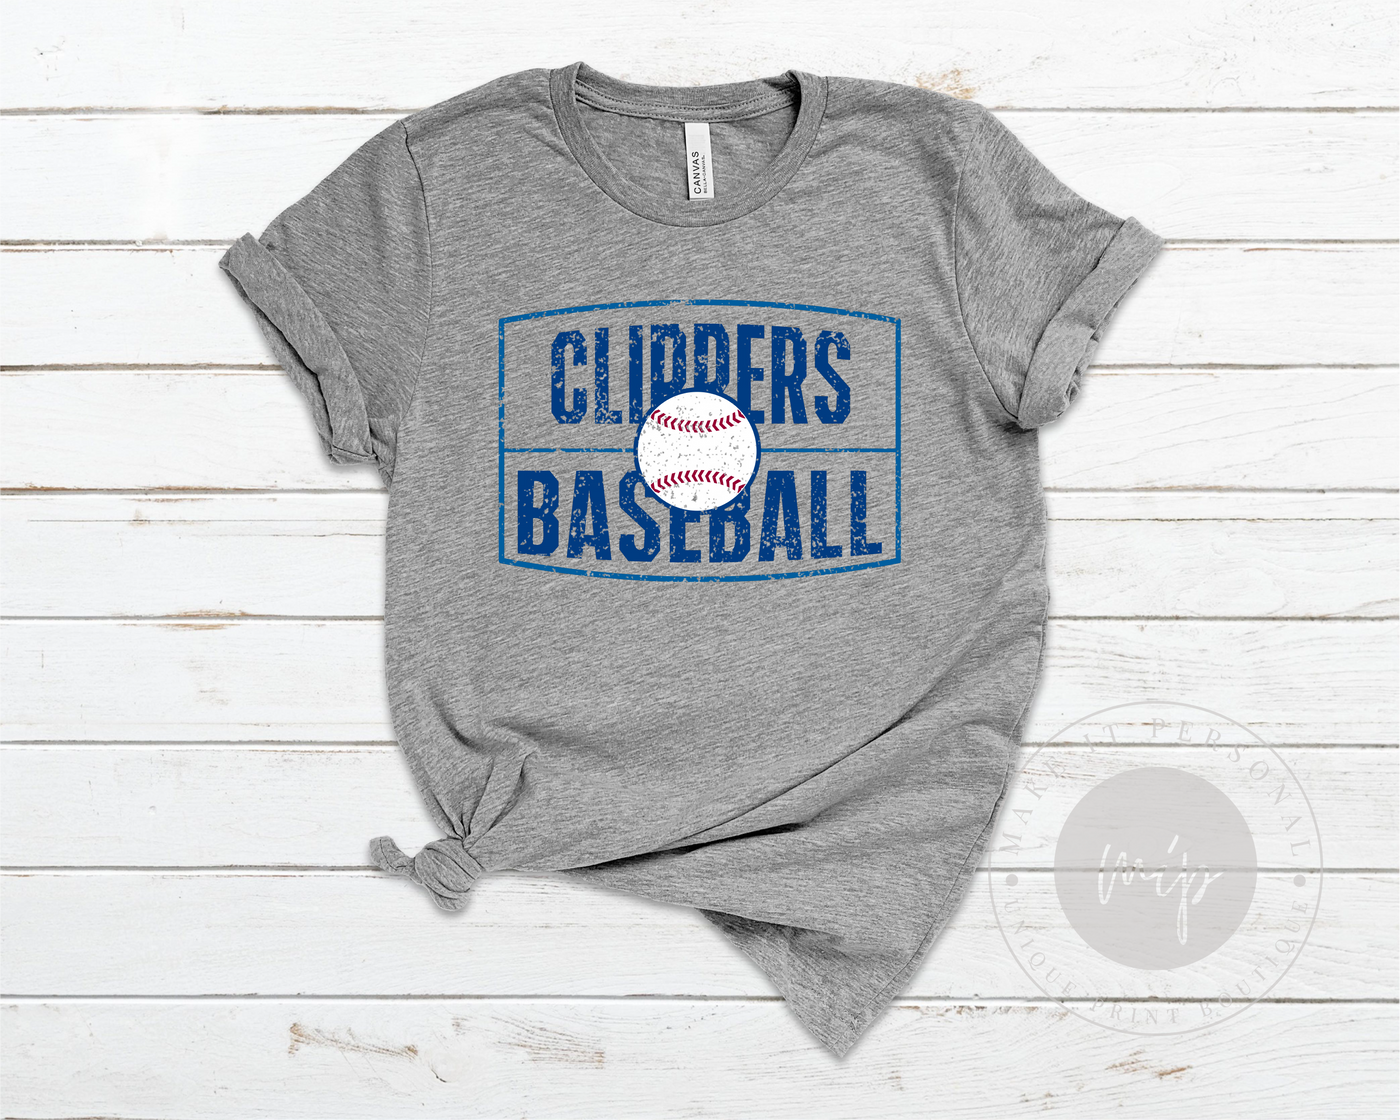 Vintage Clippers Baseball Tee